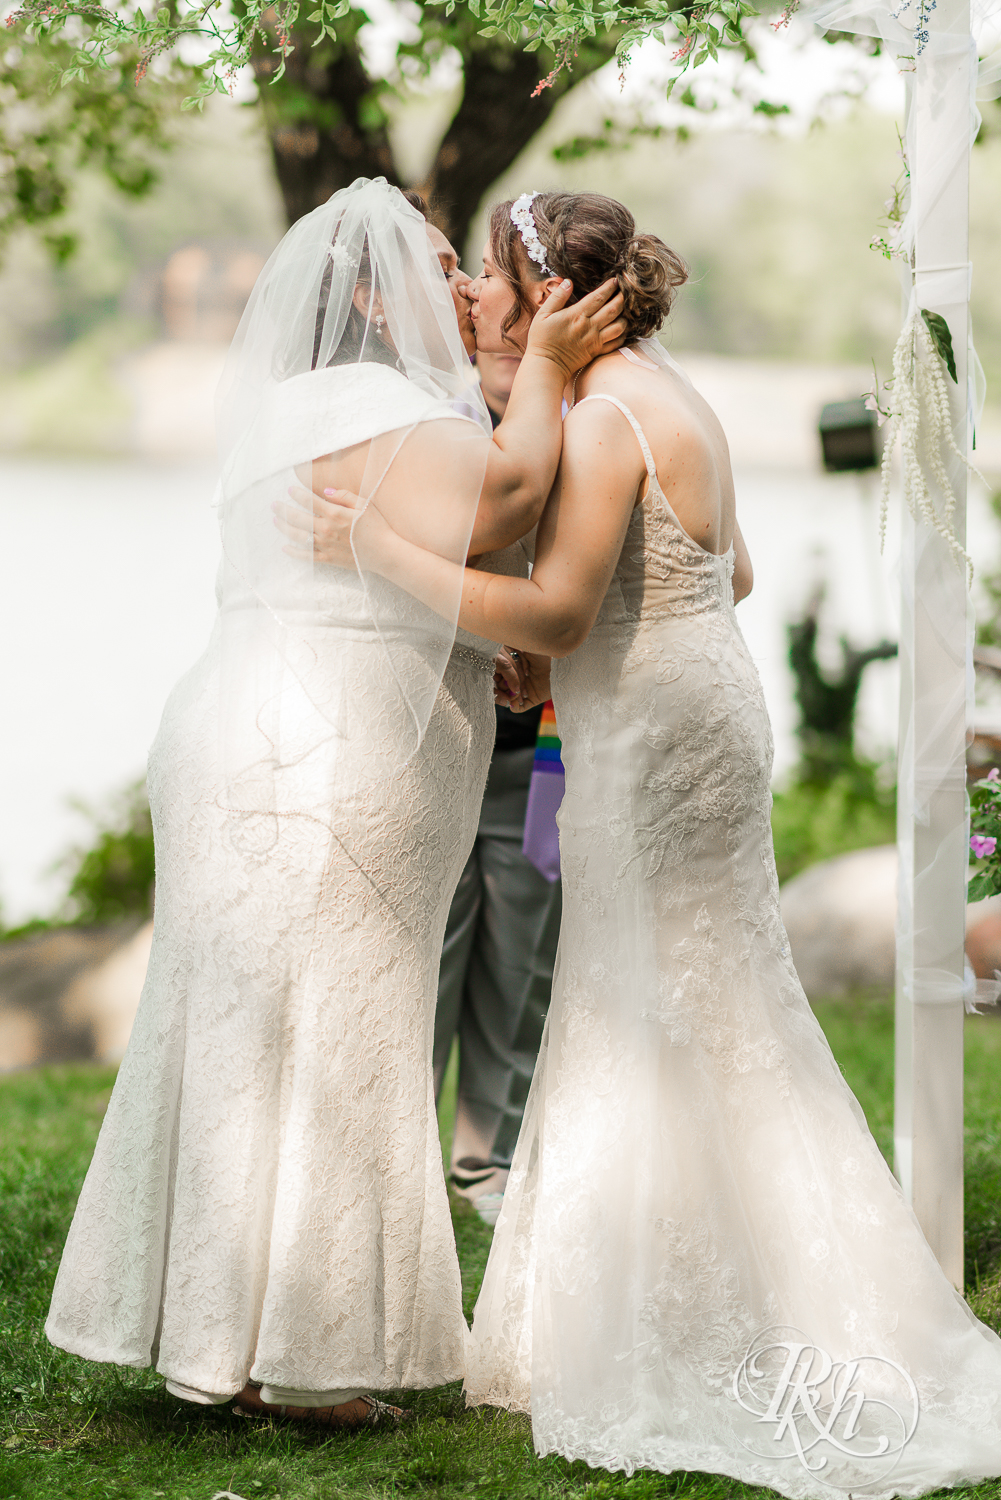 Lesbian brides kiss during outdoor wedding ceremony in Minnesota.